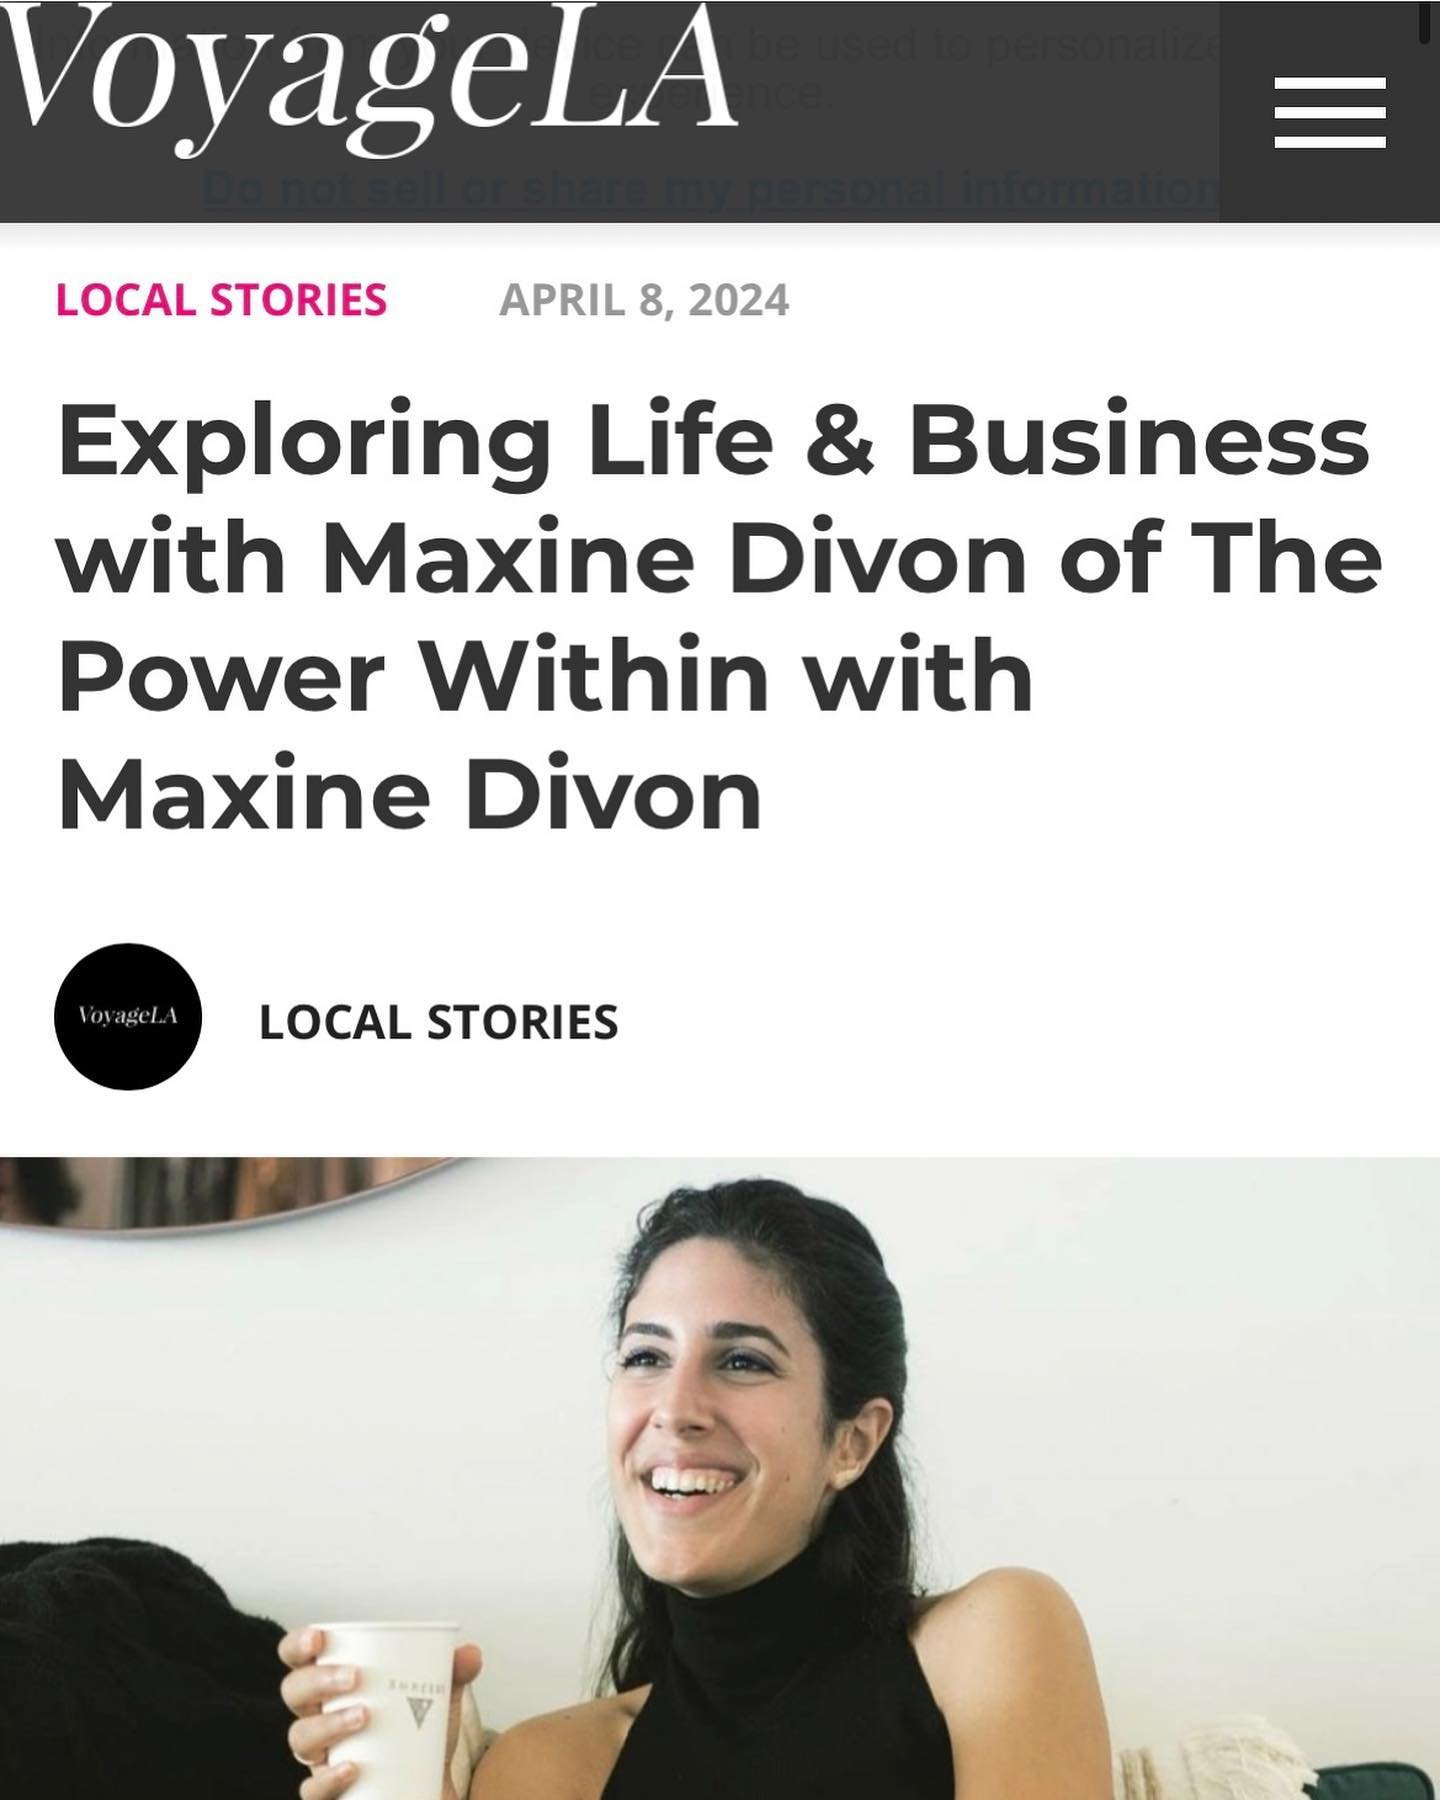 Excited to share an intimate profile about my life and new business, featured in local media outlet VoyageLA 💖 sign up for my brand new monthly newsletter at www.MaxineDivon.com 🤩 link to article on bio 🫶🏽